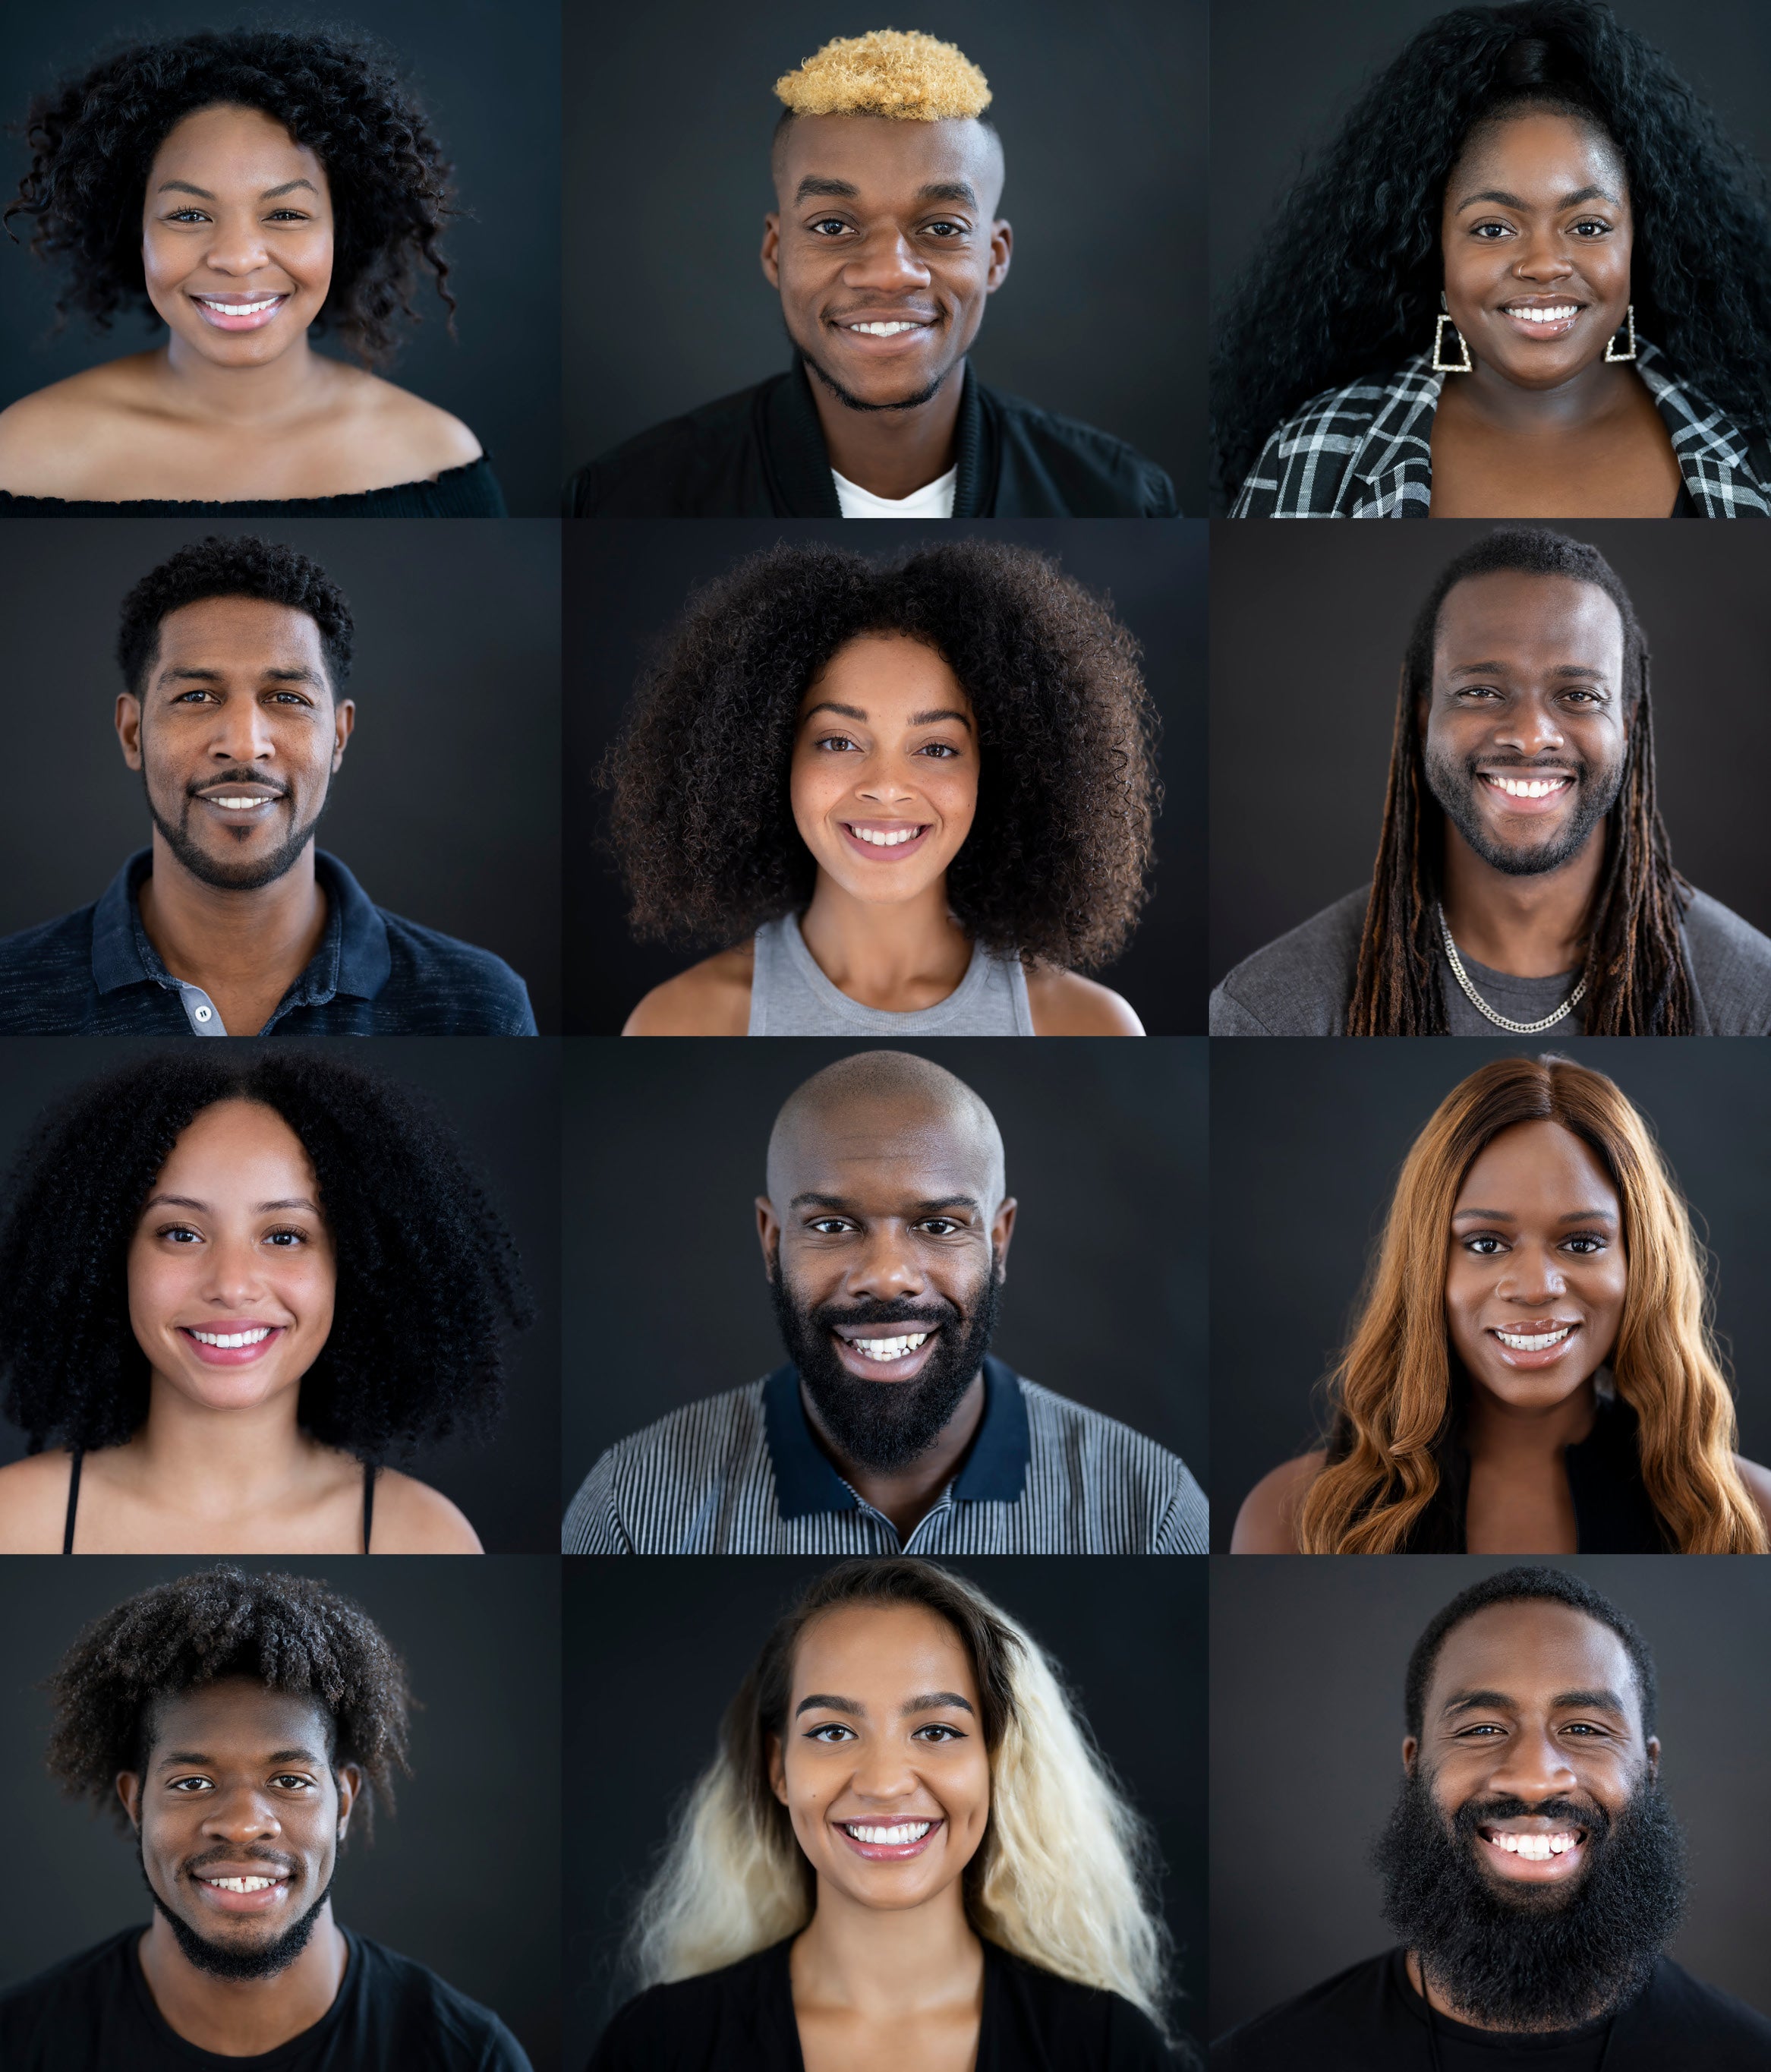 Images of black men and women